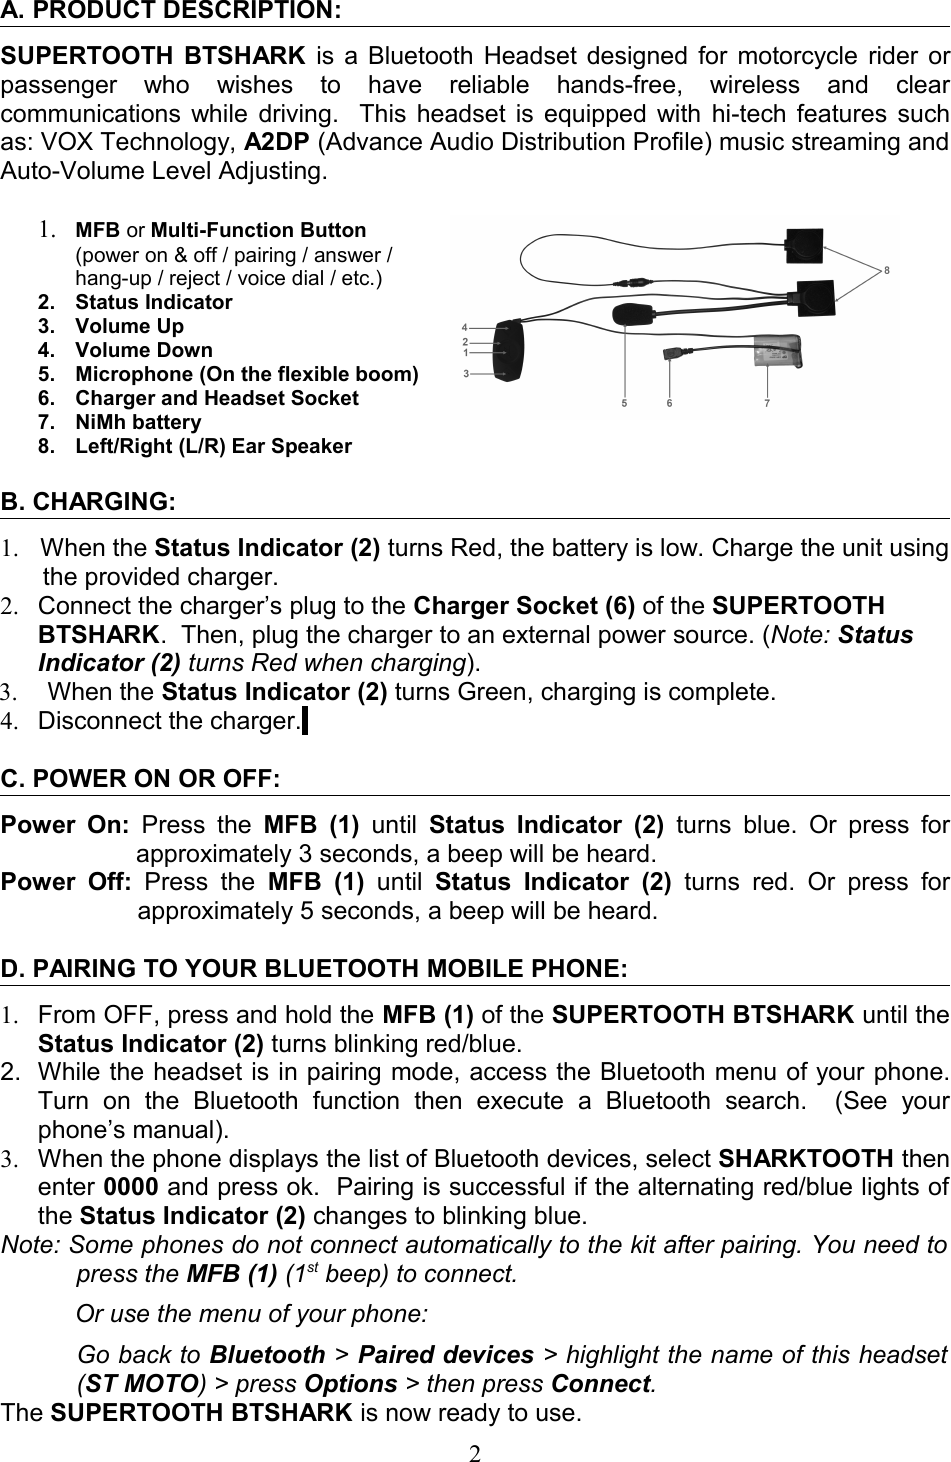 A. PRODUCT DESCRIPTION: SUPERTOOTH BTSHARK  is a Bluetooth Headset designed for motorcycle rider or passenger   who   wishes   to   have   reliable   hands-free,   wireless   and   clear communications while driving.   This headset is equipped with hi-tech features such as: VOX Technology, A2DP (Advance Audio Distribution Profile) music streaming and Auto-Volume Level Adjusting.1. MFB or Multi-Function Button (power on &amp; off / pairing / answer / hang-up / reject / voice dial / etc.)2. Status Indicator3. Volume Up4. Volume Down5. Microphone (On the flexible boom)6. Charger and Headset Socket7. NiMh battery8. Left/Right (L/R) Ear SpeakerB. CHARGING:1. When the Status Indicator (2) turns Red, the battery is low. Charge the unit using the provided charger.      2. Connect the charger’s plug to the Charger Socket (6) of the SUPERTOOTH BTSHARK.  Then, plug the charger to an external power source. (Note: Status Indicator (2) turns Red when charging). 3.  When the Status Indicator (2) turns Green, charging is complete.  4. Disconnect the charger. C. POWER ON OR OFF:Power On:  Press the  MFB (1)  until  Status Indicator (2)  turns blue. Or press for approximately 3 seconds, a beep will be heard.Power  Off:  Press  the  MFB  (1)  until  Status  Indicator  (2)  turns  red. Or  press for approximately 5 seconds, a beep will be heard.D. PAIRING TO YOUR BLUETOOTH MOBILE PHONE:1. From OFF, press and hold the MFB (1) of the SUPERTOOTH BTSHARK until the Status Indicator (2) turns blinking red/blue.2. While the headset is in pairing mode, access the Bluetooth menu of your phone. Turn   on   the   Bluetooth   function   then   execute   a   Bluetooth   search.     (See   your phone’s manual). 3. When the phone displays the list of Bluetooth devices, select SHARKTOOTH then enter 0000 and press ok.  Pairing is successful if the alternating red/blue lights of the Status Indicator (2) changes to blinking blue.  Note: Some phones do not connect automatically to the kit after pairing. You need to  press the MFB (1) (1st beep) to connect. Or use the menu of your phone:Go back to Bluetooth &gt; Paired devices &gt; highlight the name of this headset  (ST MOTO) &gt; press Options &gt; then press Connect.The SUPERTOOTH BTSHARK is now ready to use.2